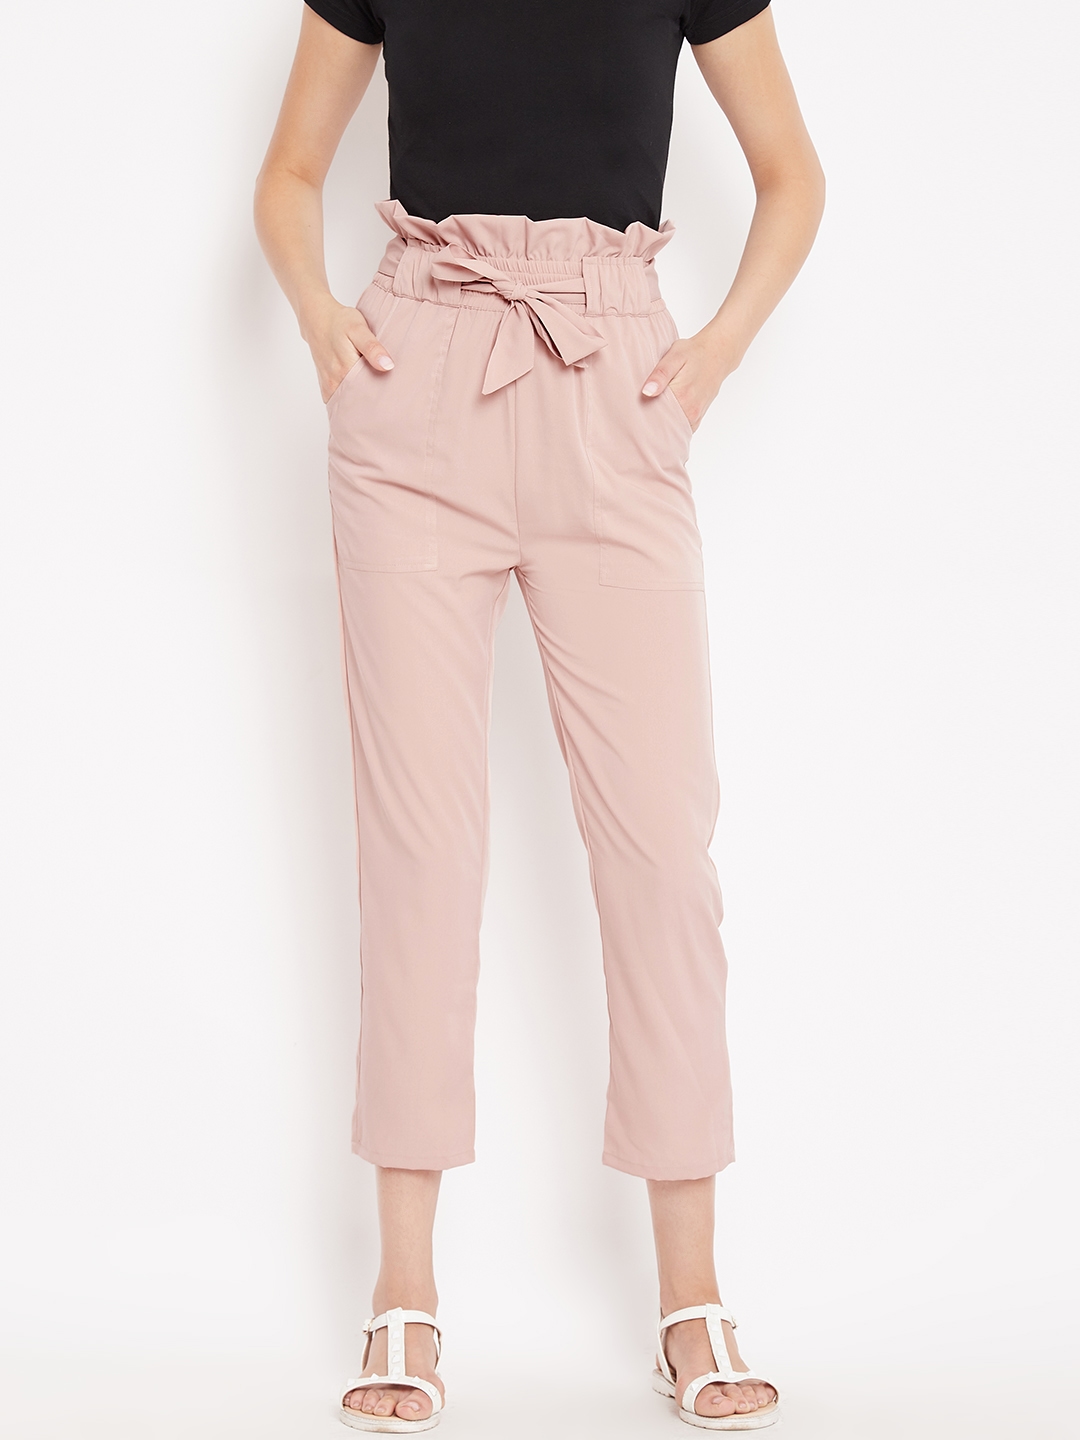 30 Stylish Pink Pants Outfit for Women  Outfit Styles